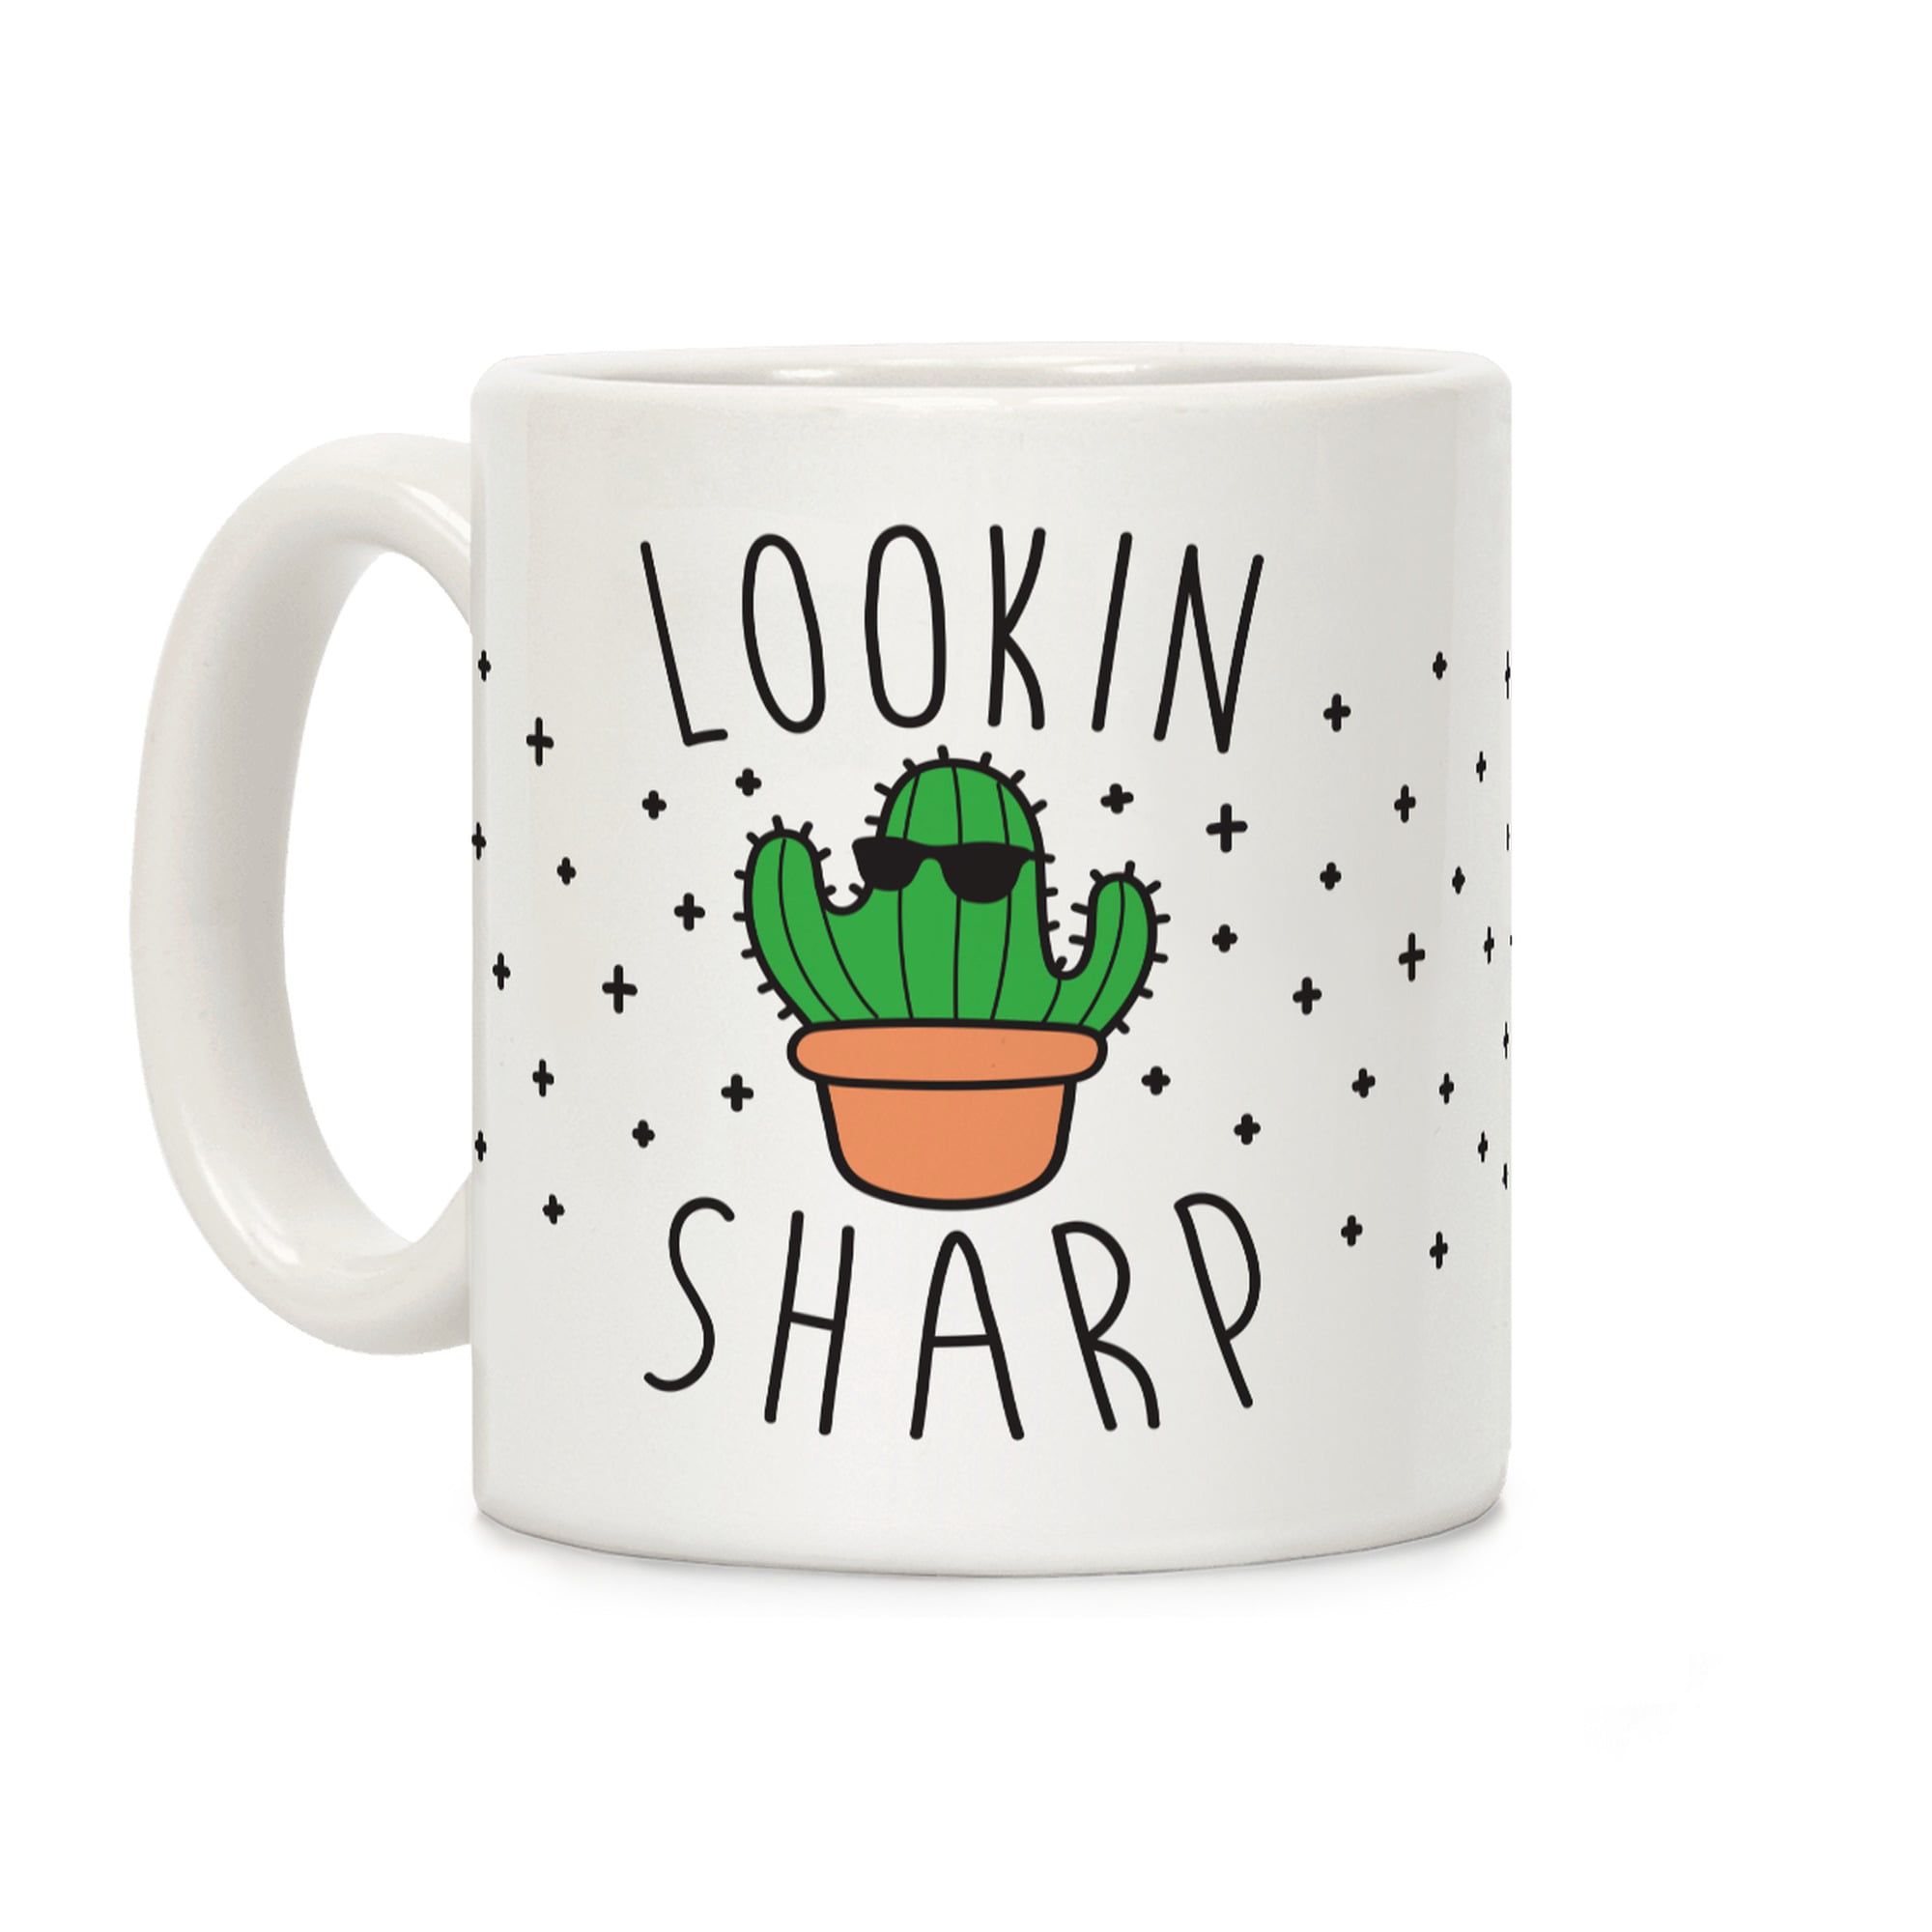 LookHUMAN You Are Toadally Awesome White 11 Ounce Ceramic Coffee Mug